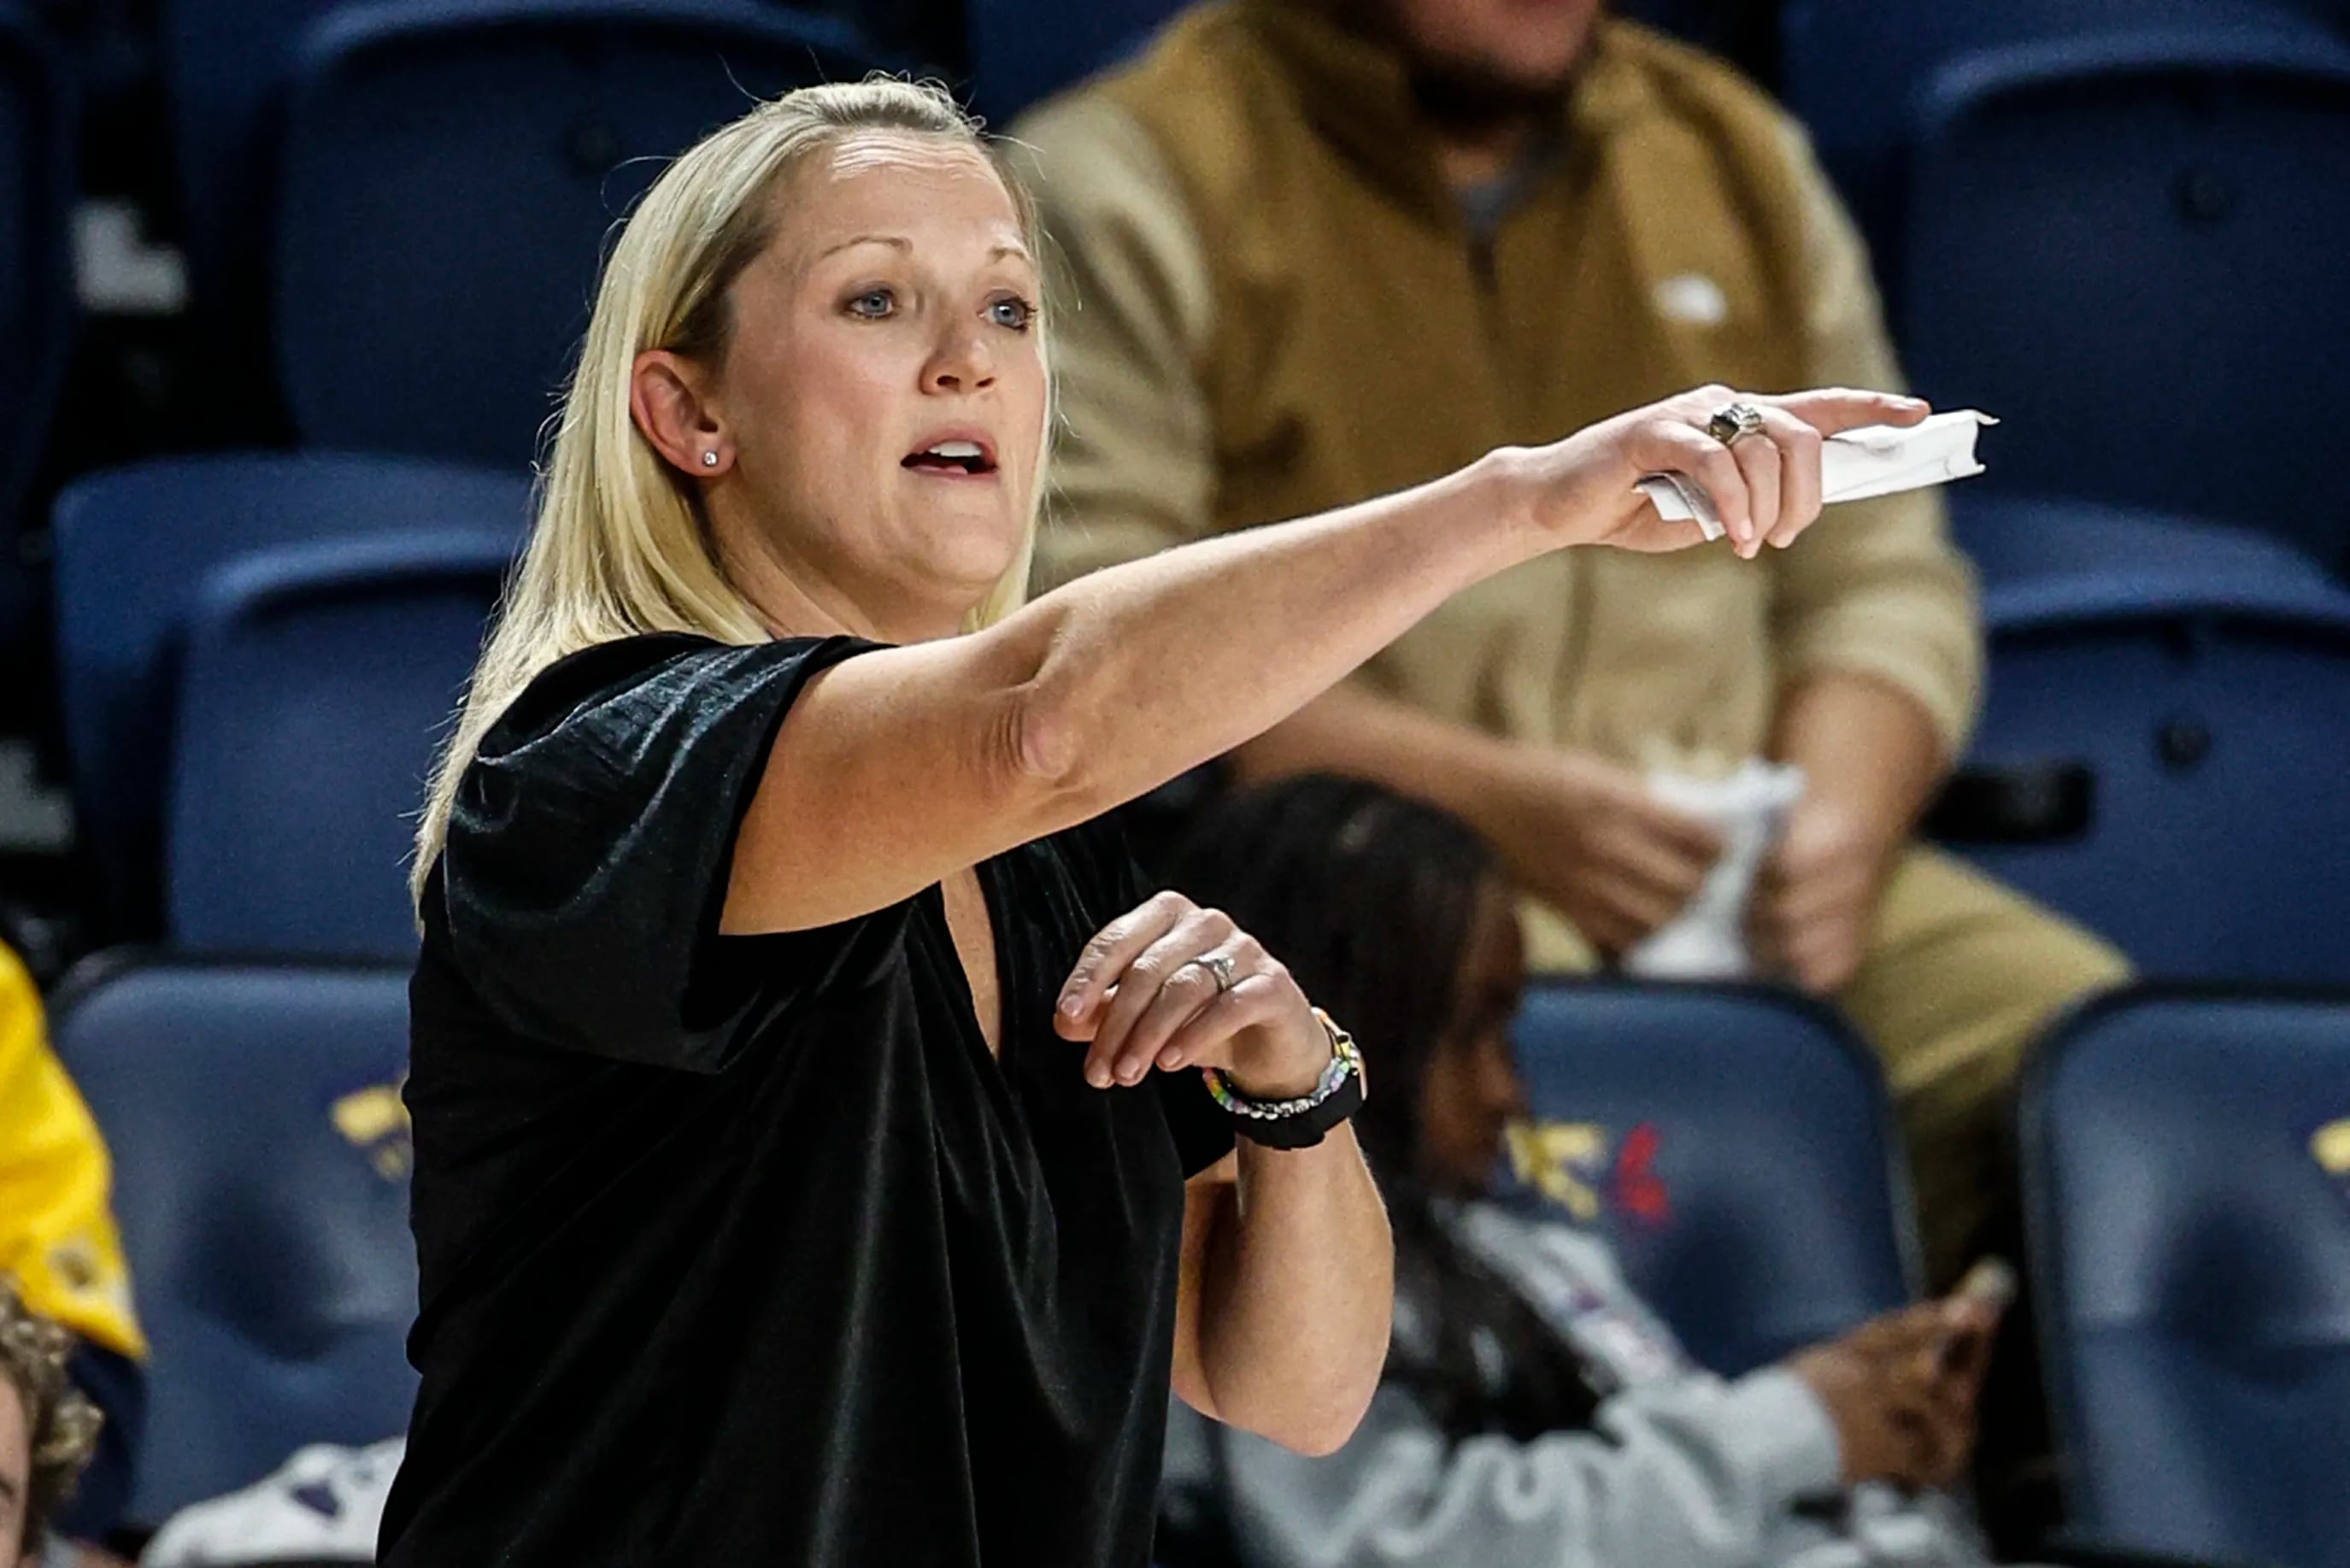 Drexel head coach Amy Mallon is in her first Big 5 season as a head coach, but she has plenty of experience from her playing days.